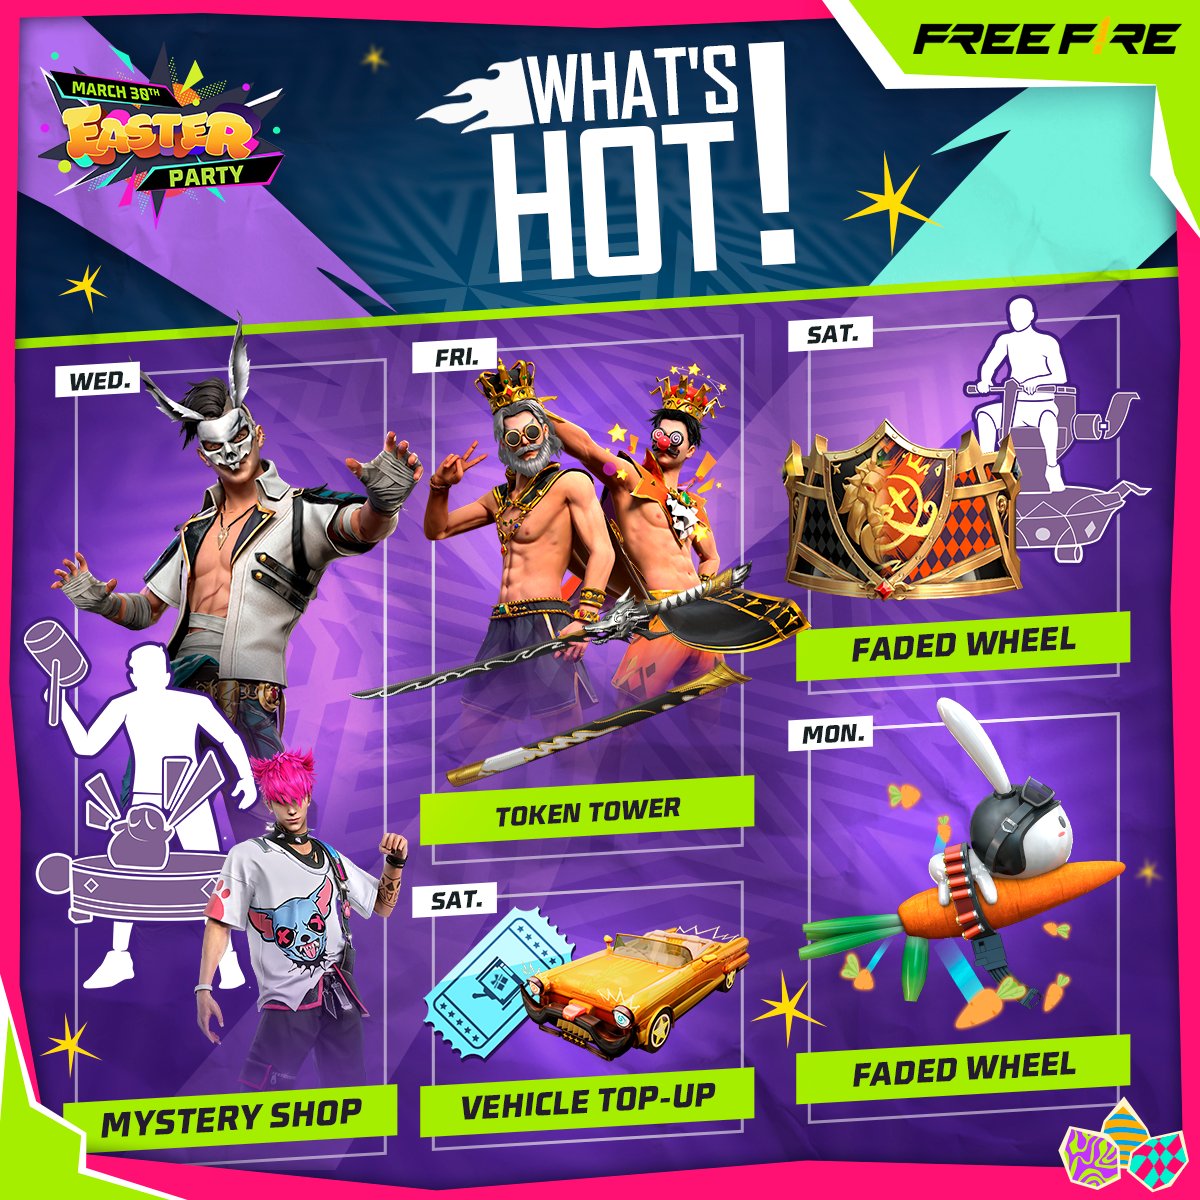 📕 The #WEEKLYAGENDA IS HERE! 📕 📢 Make way for the KING 👑 Fight for the crown with a new beard to claim the throne of the new emote. 🔨 Also, conquer the Whac-A-Cotton emote, and don't forget to eat fruits and vegetables with the return of a dangerous MP5. 🐰🥕